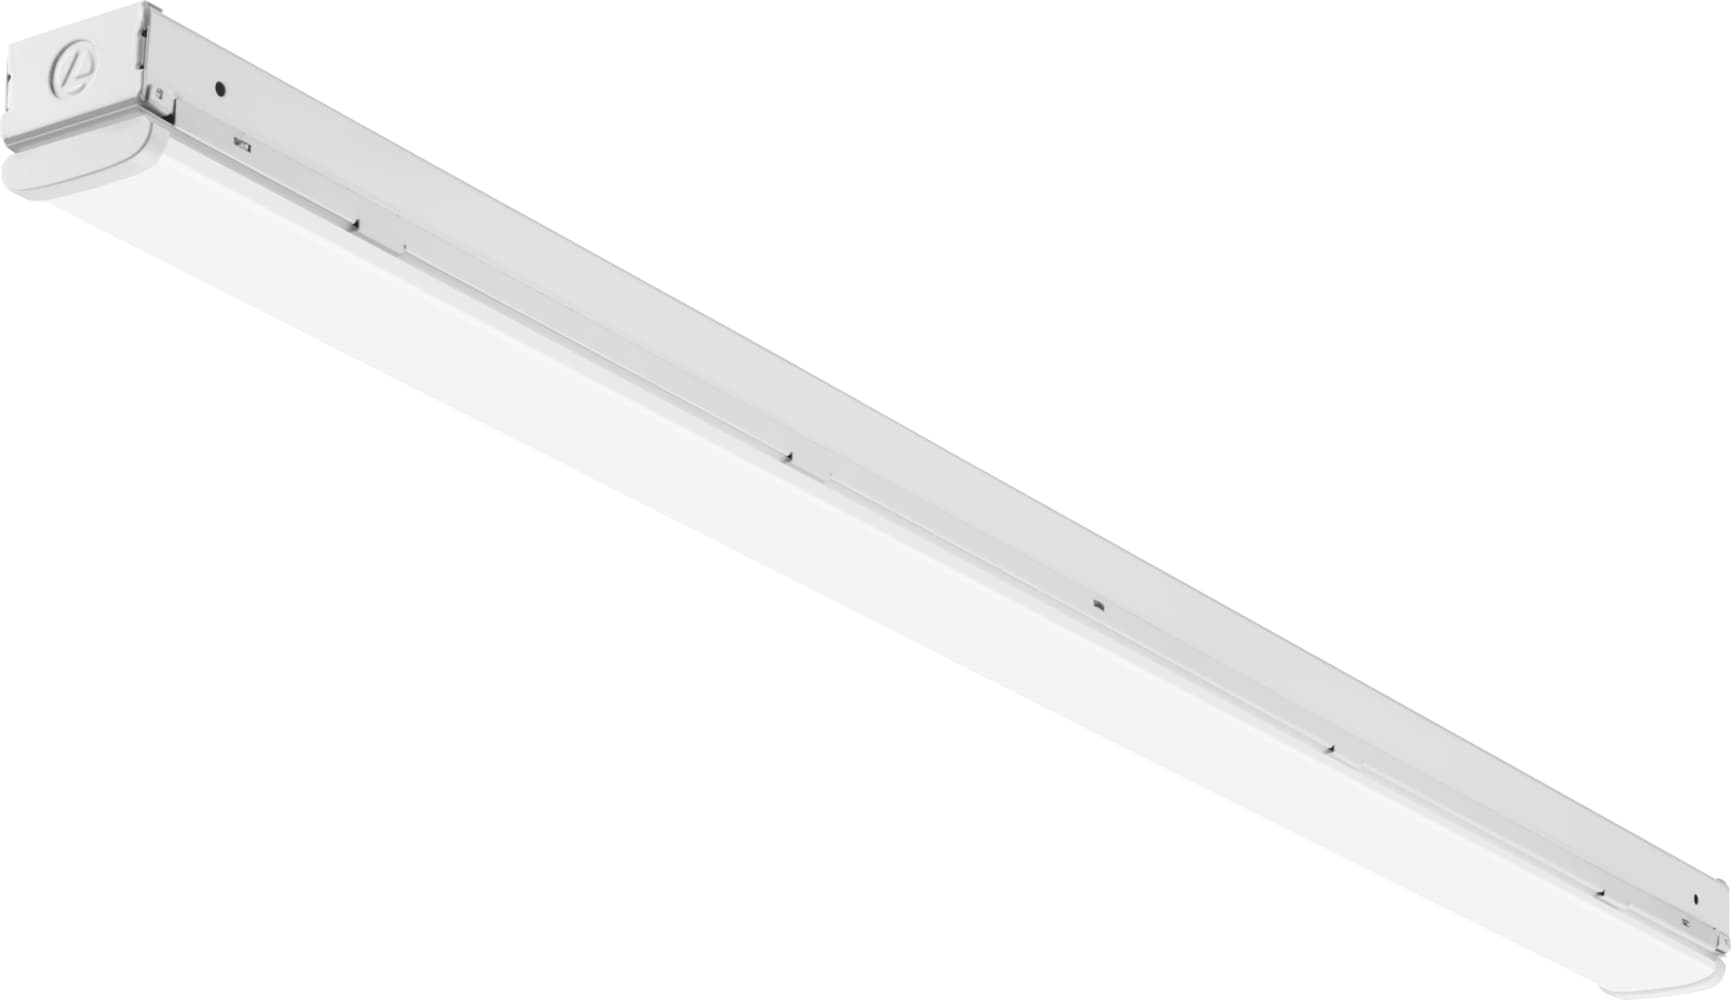 Why Commercial LED Strip Light Fixtures are so Popular?